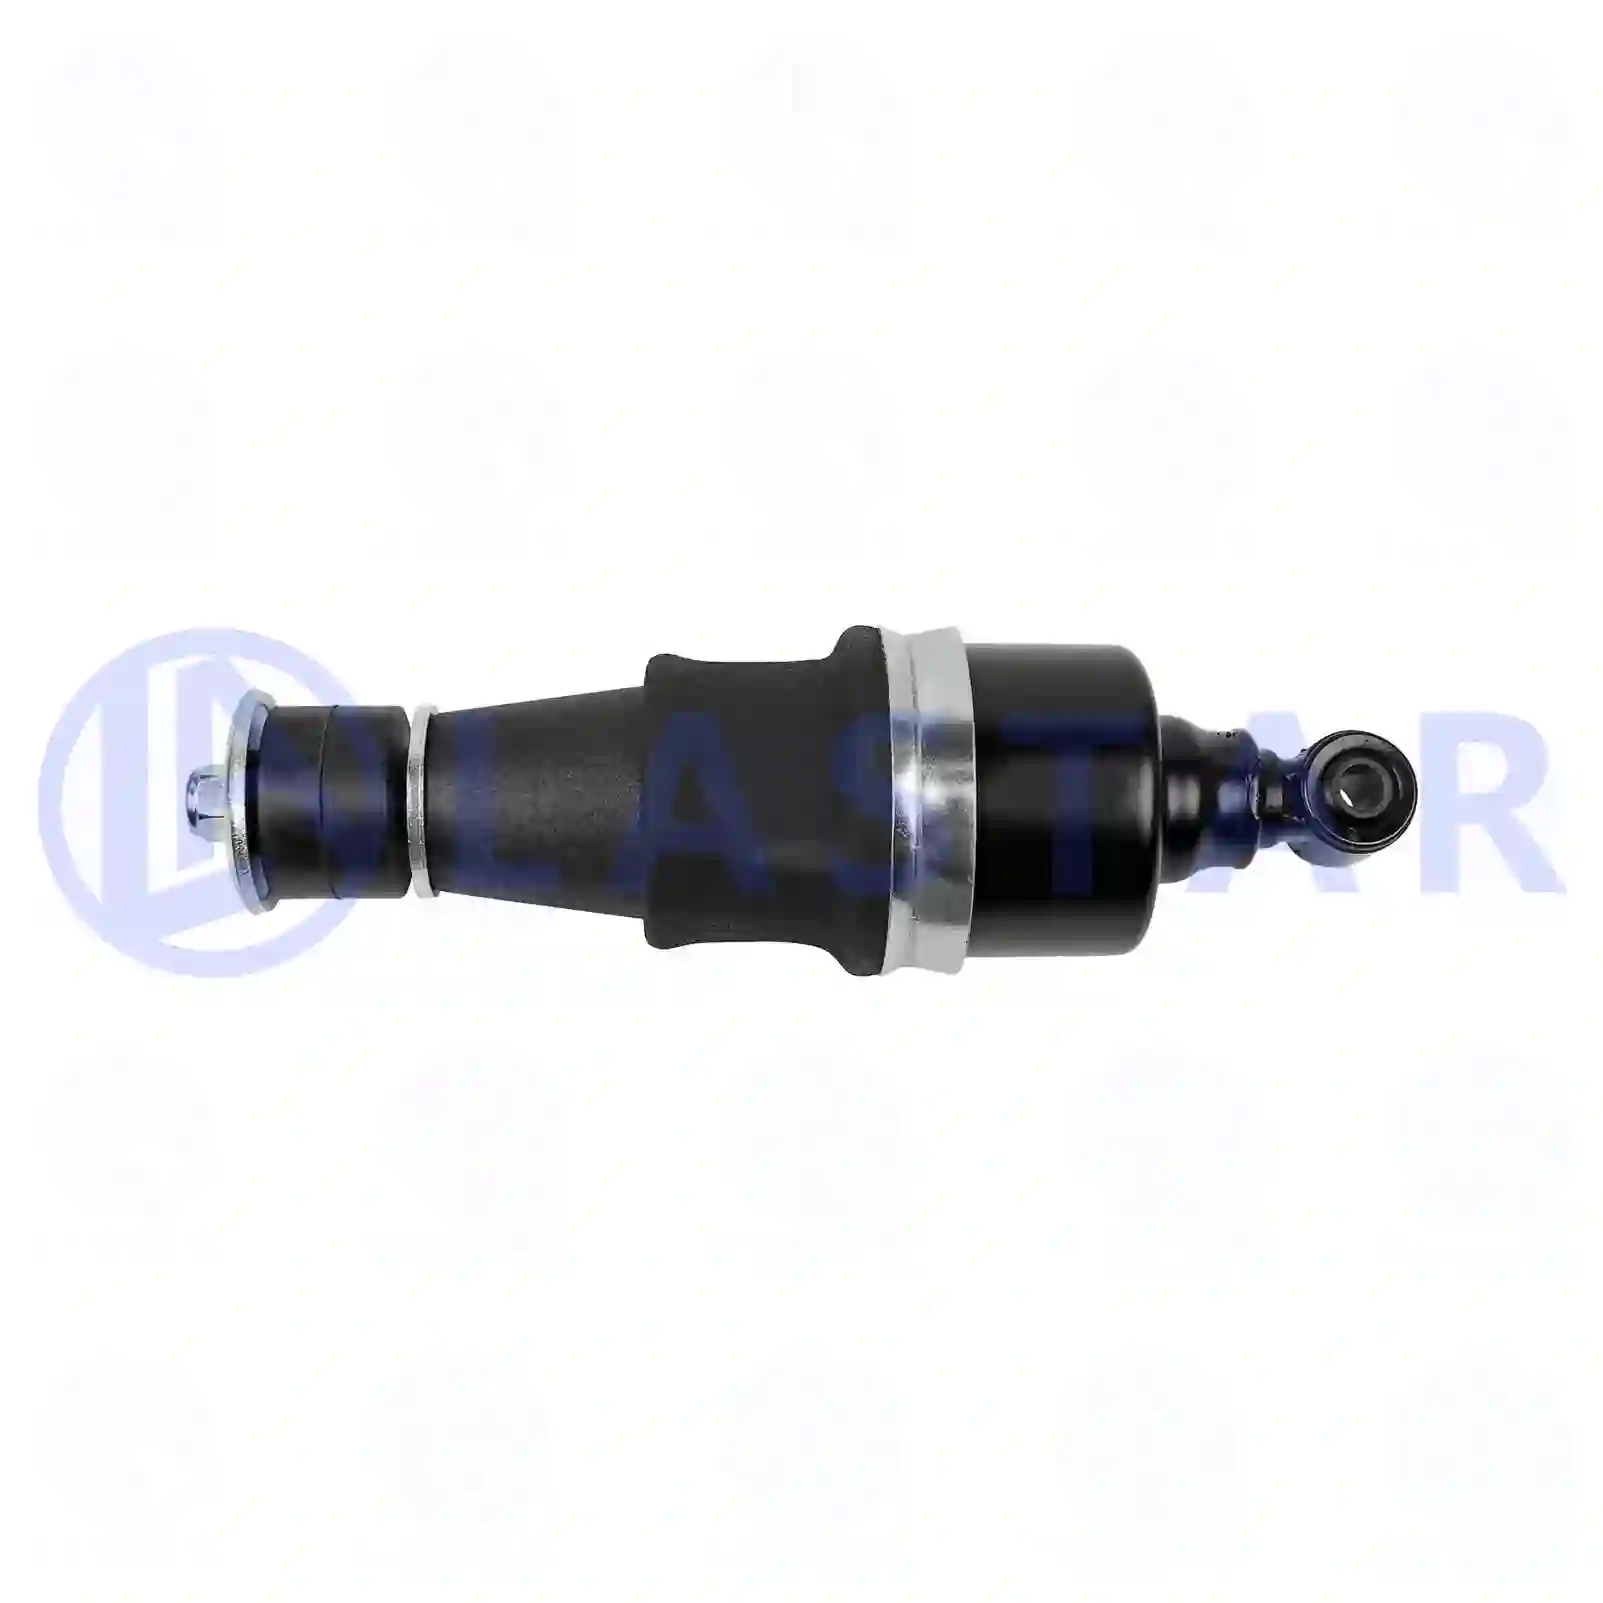 Cabin shock absorber, with air bellow, 77735225, 0299862, 1245600, 1265282, 1285394, 1321591, 1353451, 1353454, 1371066, 1623477, 1792423, 299862, ZG41218-0008 ||  77735225 Lastar Spare Part | Truck Spare Parts, Auotomotive Spare Parts Cabin shock absorber, with air bellow, 77735225, 0299862, 1245600, 1265282, 1285394, 1321591, 1353451, 1353454, 1371066, 1623477, 1792423, 299862, ZG41218-0008 ||  77735225 Lastar Spare Part | Truck Spare Parts, Auotomotive Spare Parts